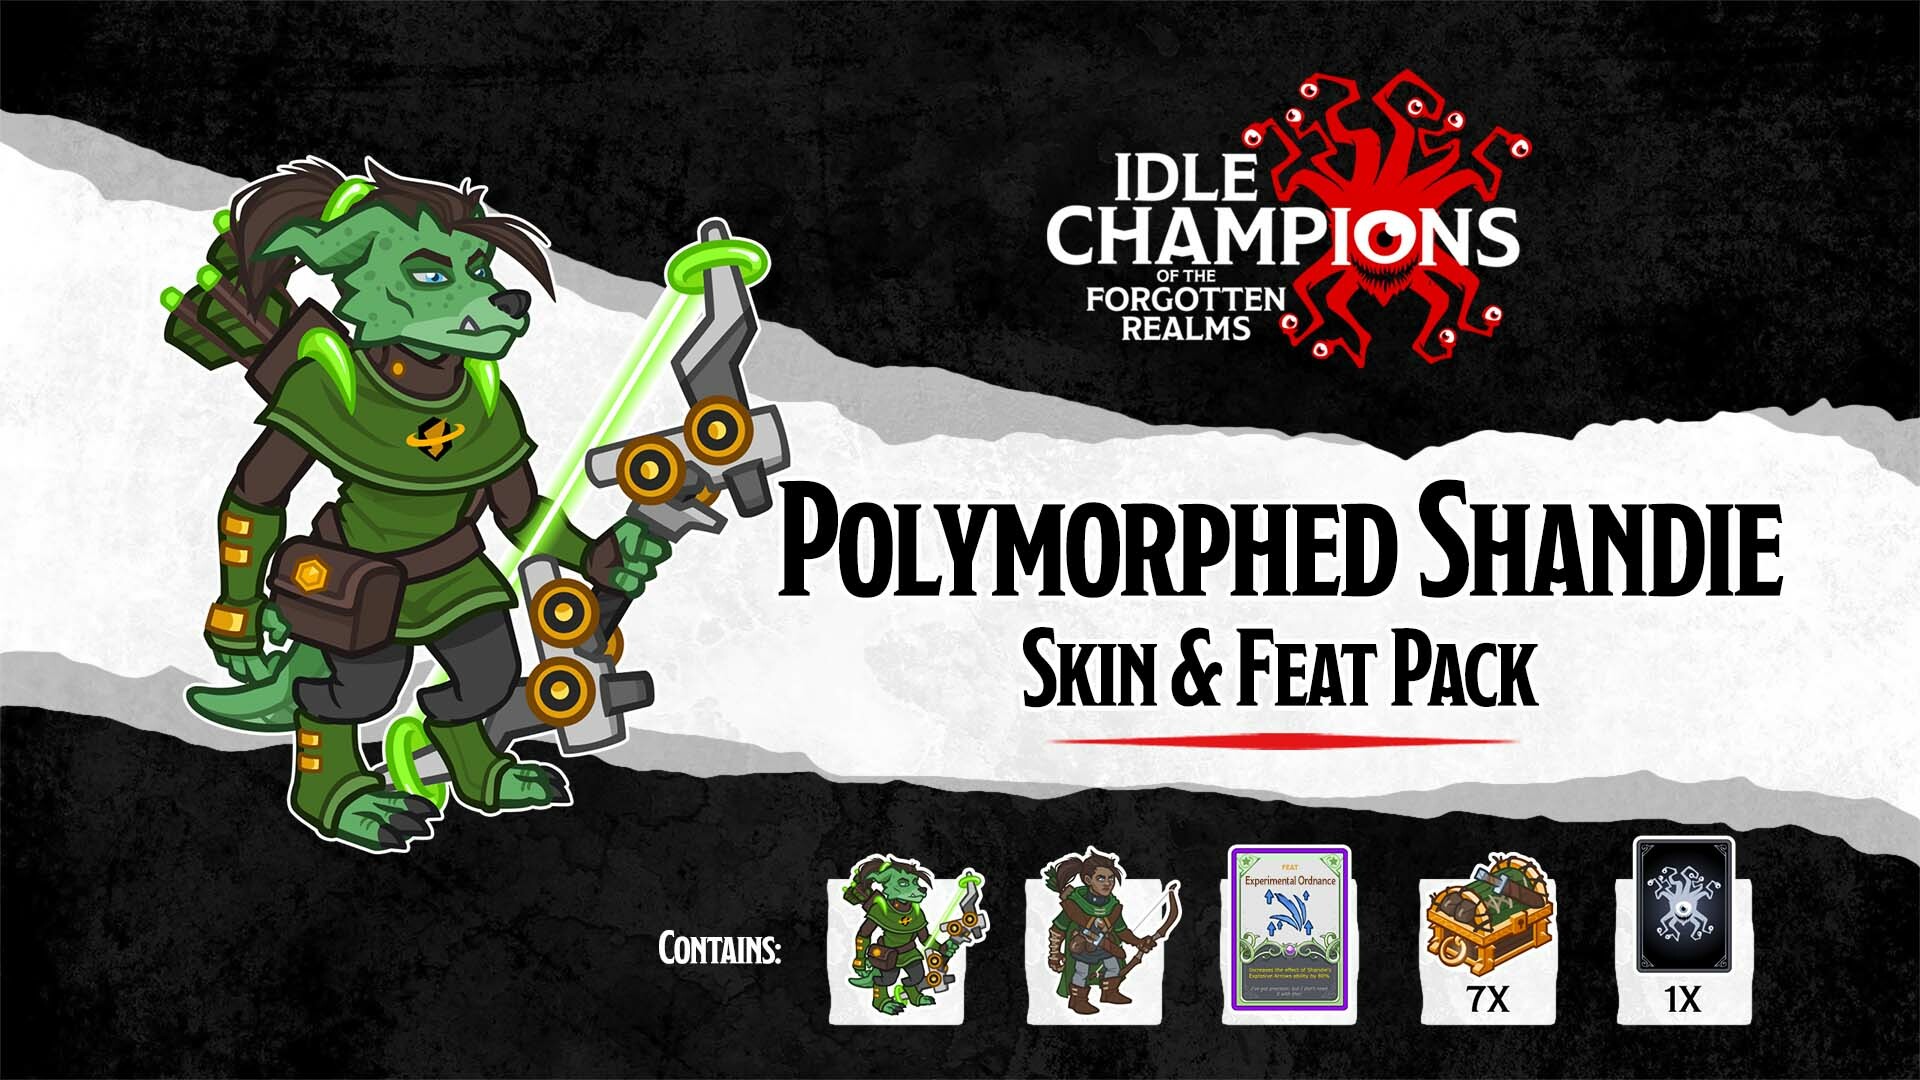 Idle Champions - Polymorphed Shandie Skin & Feat Pack DLC Steam CD Key 1.02 $